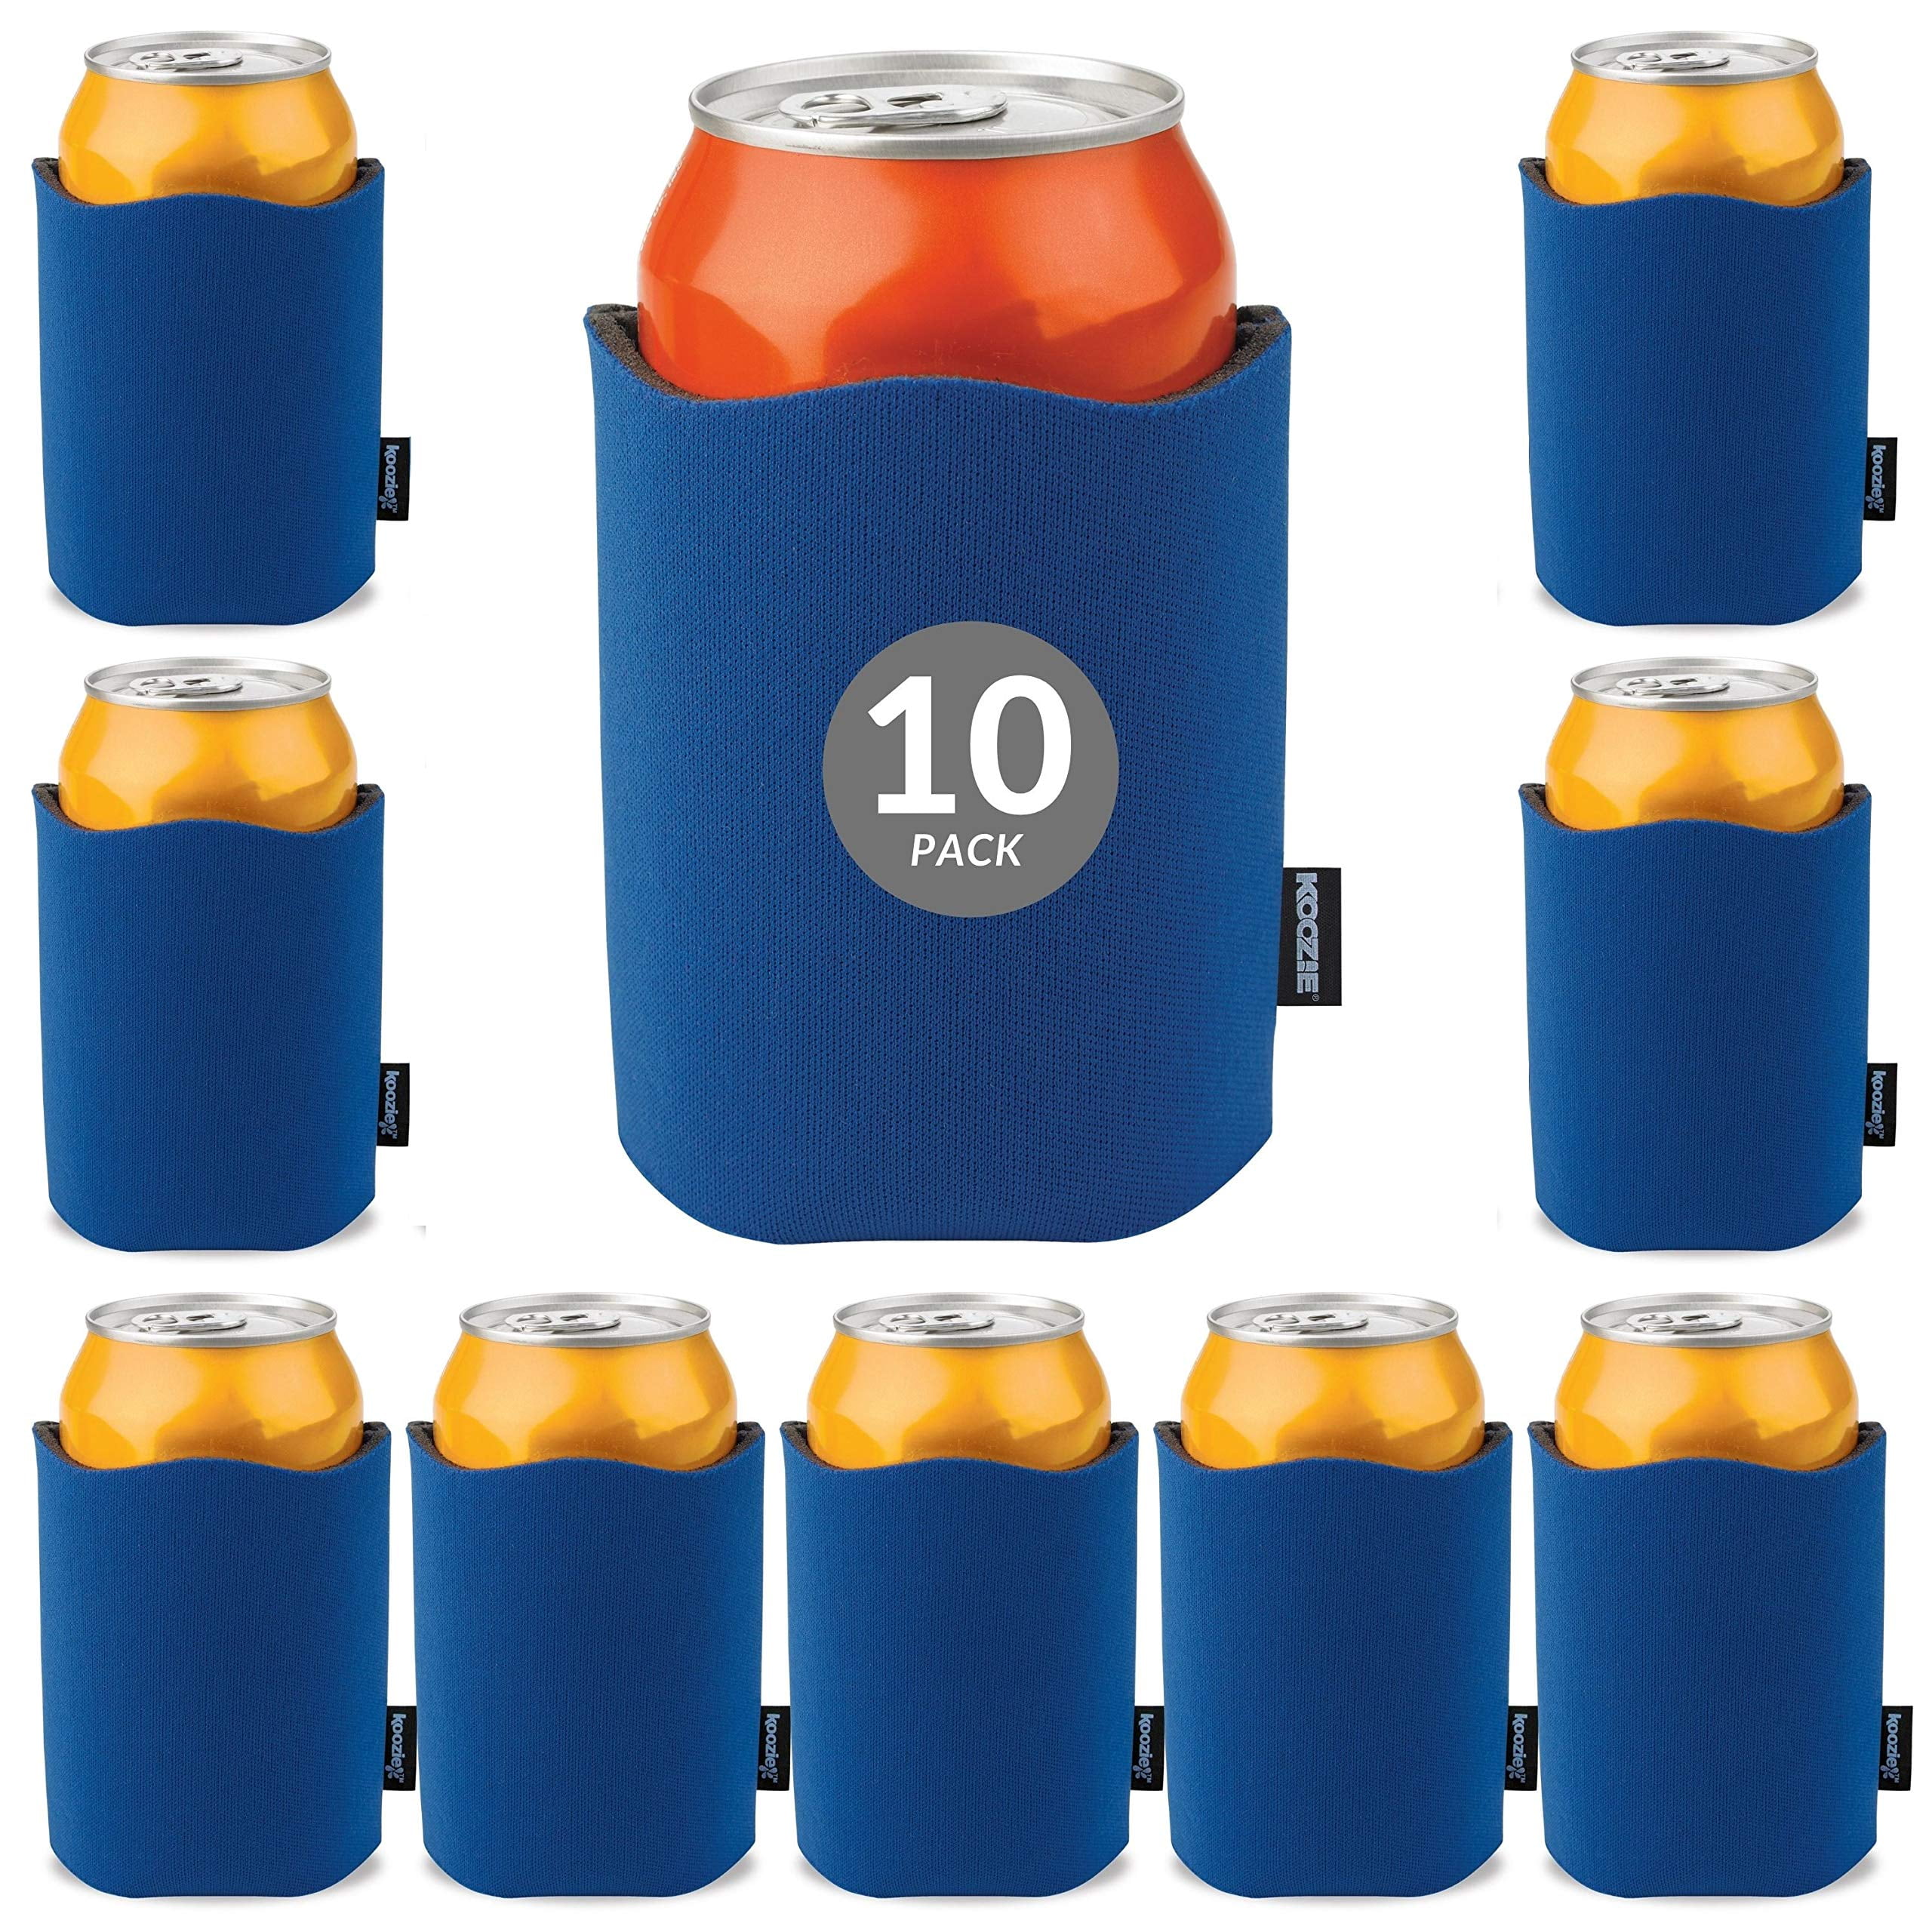 Weddings Party Favors Baseball 6 Pack Reusable Neoprene Collapsible Beer Koozies Holder Beer Can Cooler Sleeves for BBQ Beer Coozies for Cans Events 